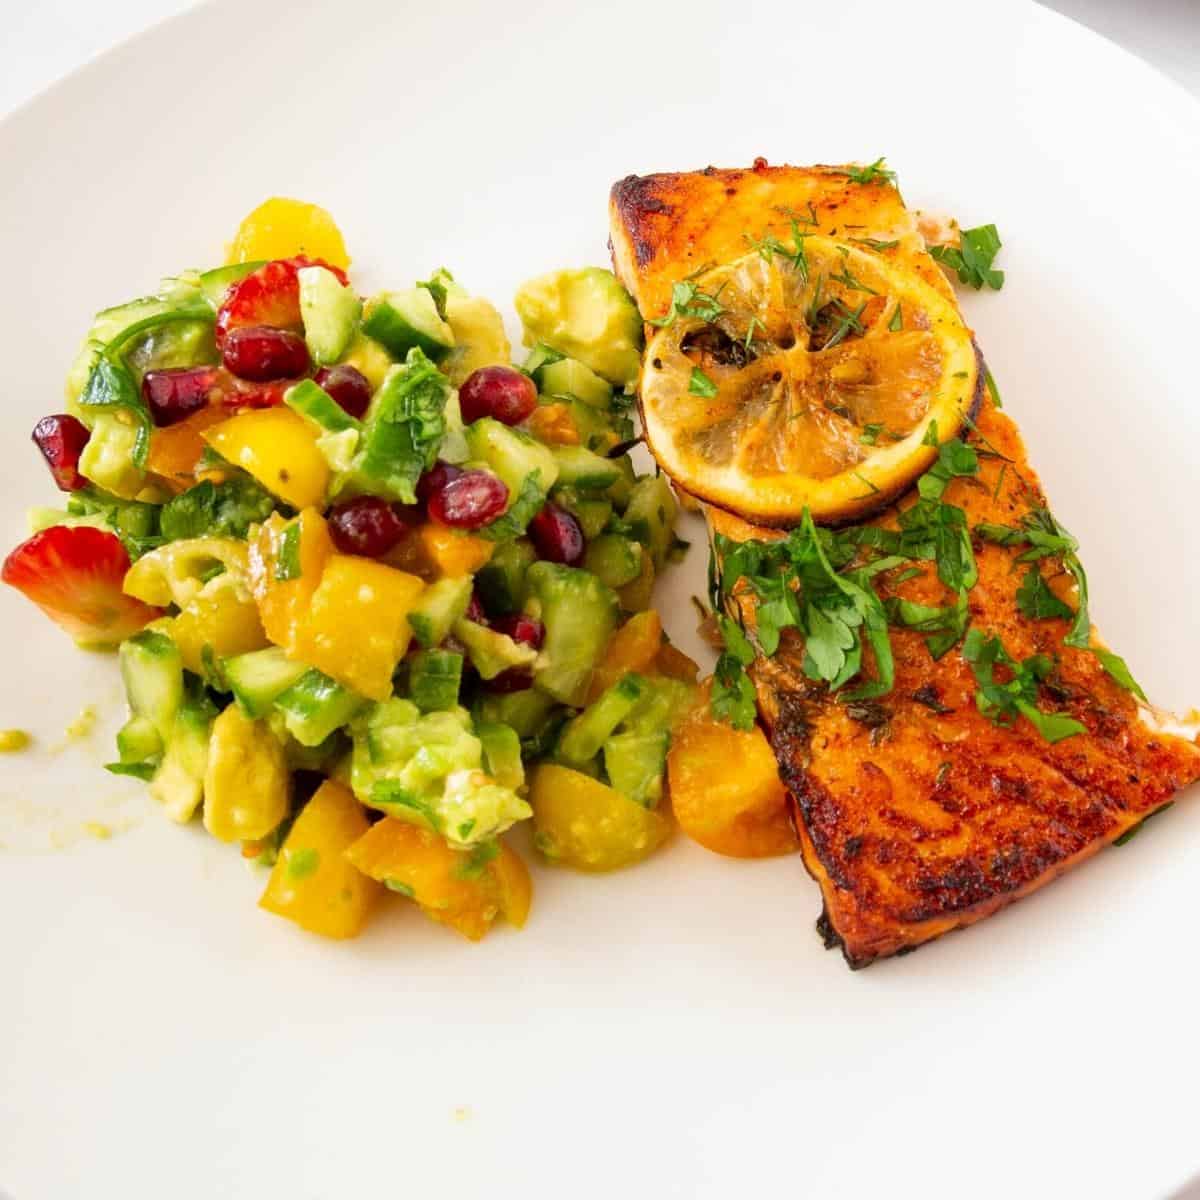 A slice of salmon on a plate with salad.